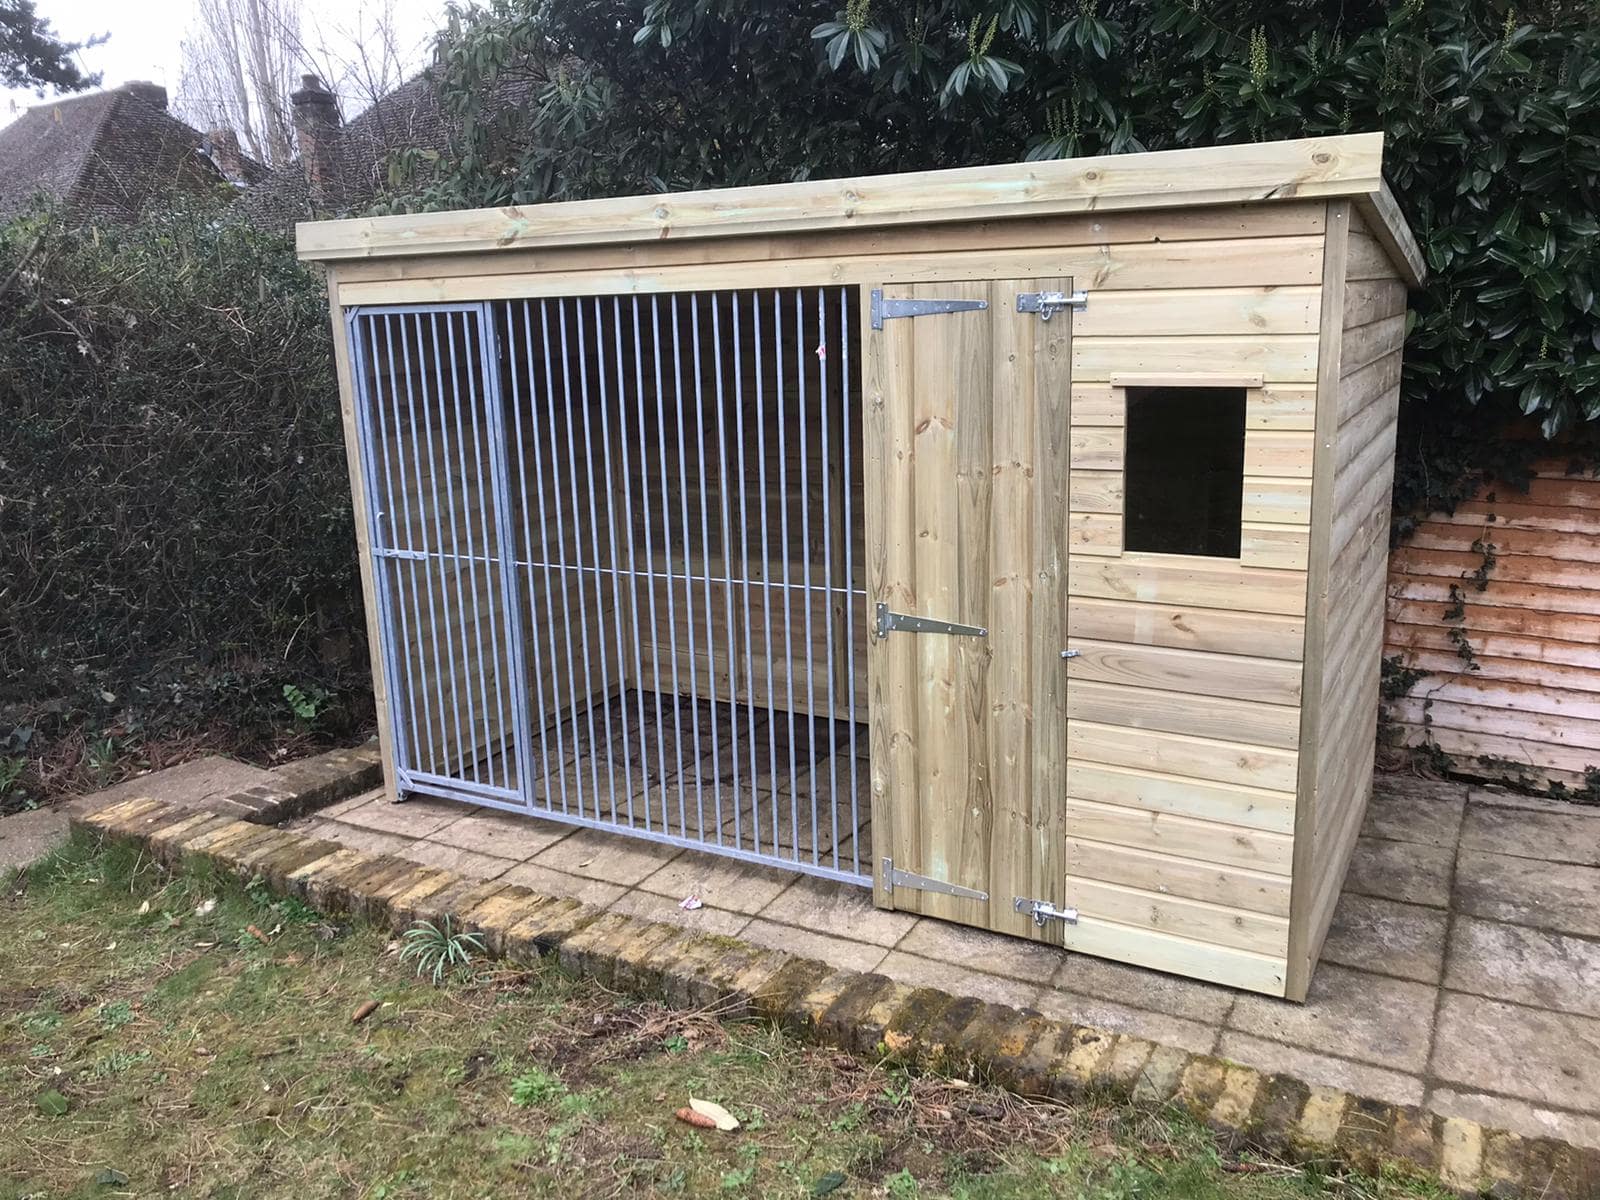 Stapeley Wooden Dog Kennel And Run 10'6ft (wide) x 5ft (deep) x 6'6ft (high)